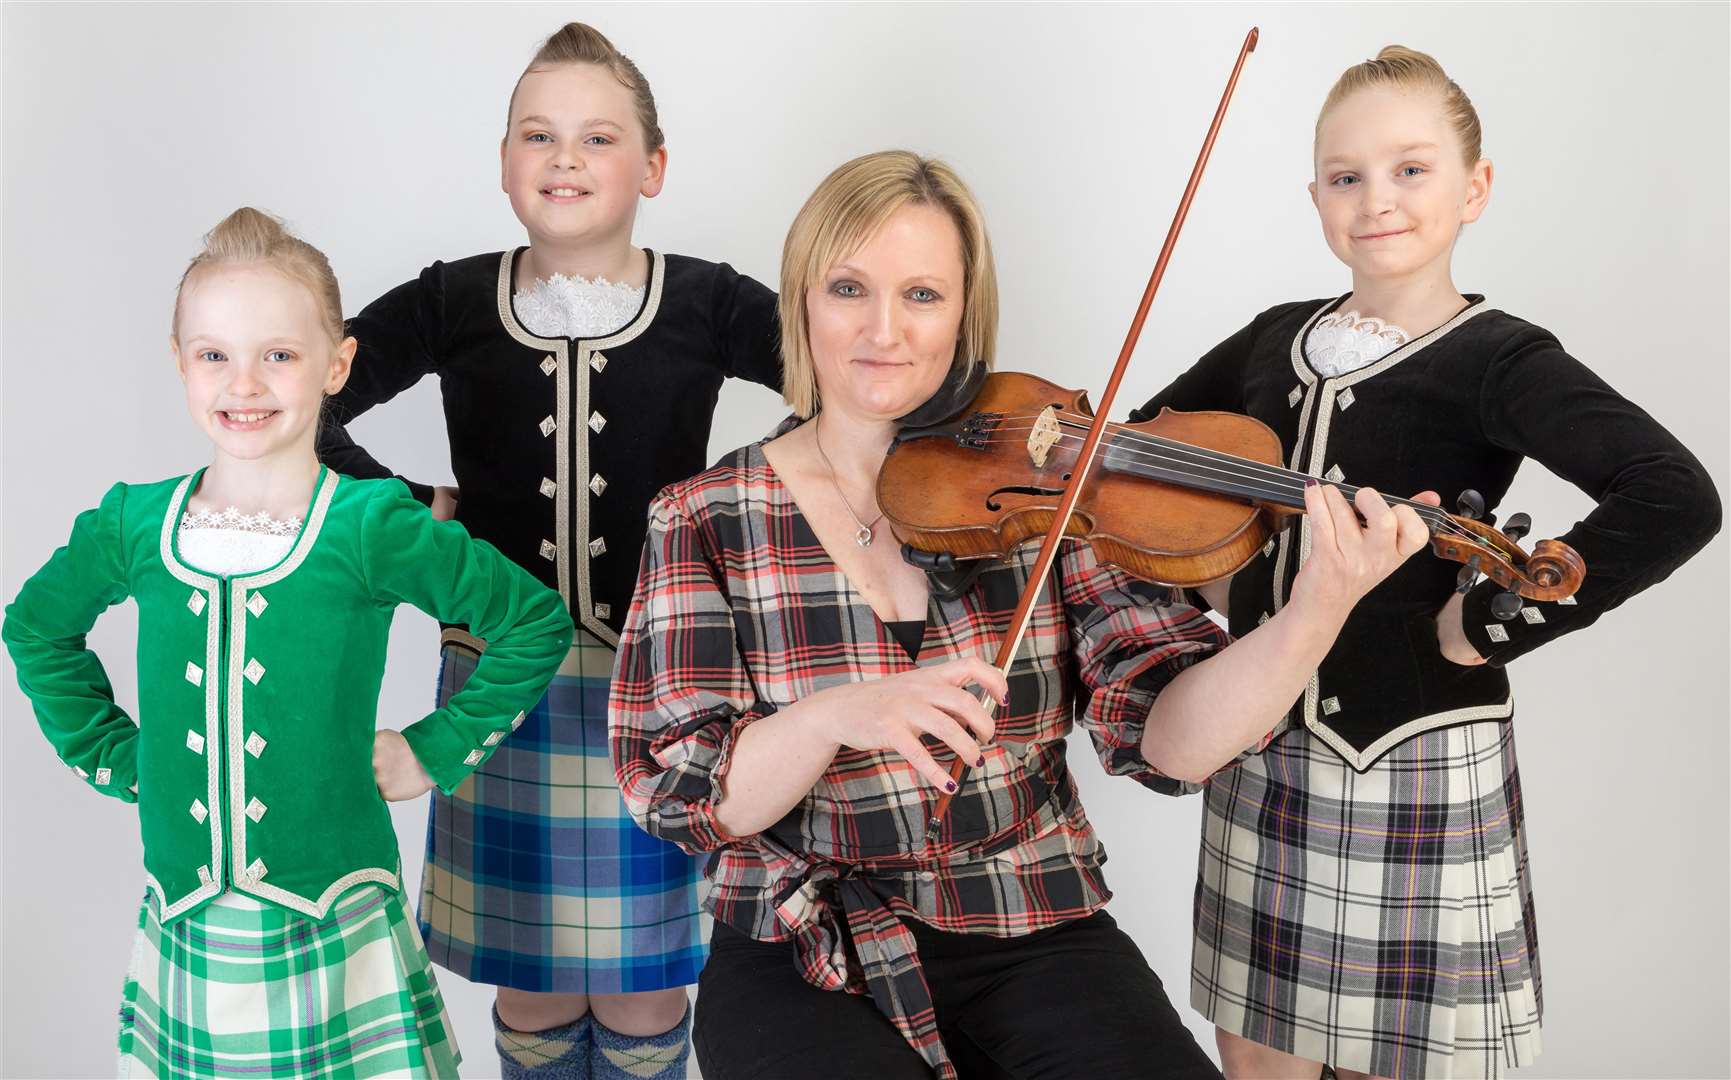 Karen Steven with dancers from the Tanya Horne School of Dancing. They are (from left) Eilidh Budge, Halkirk, Chloe Mackay, Halkirk, and Skye McLeod, Thurso. Picture: Duncan McLachlan